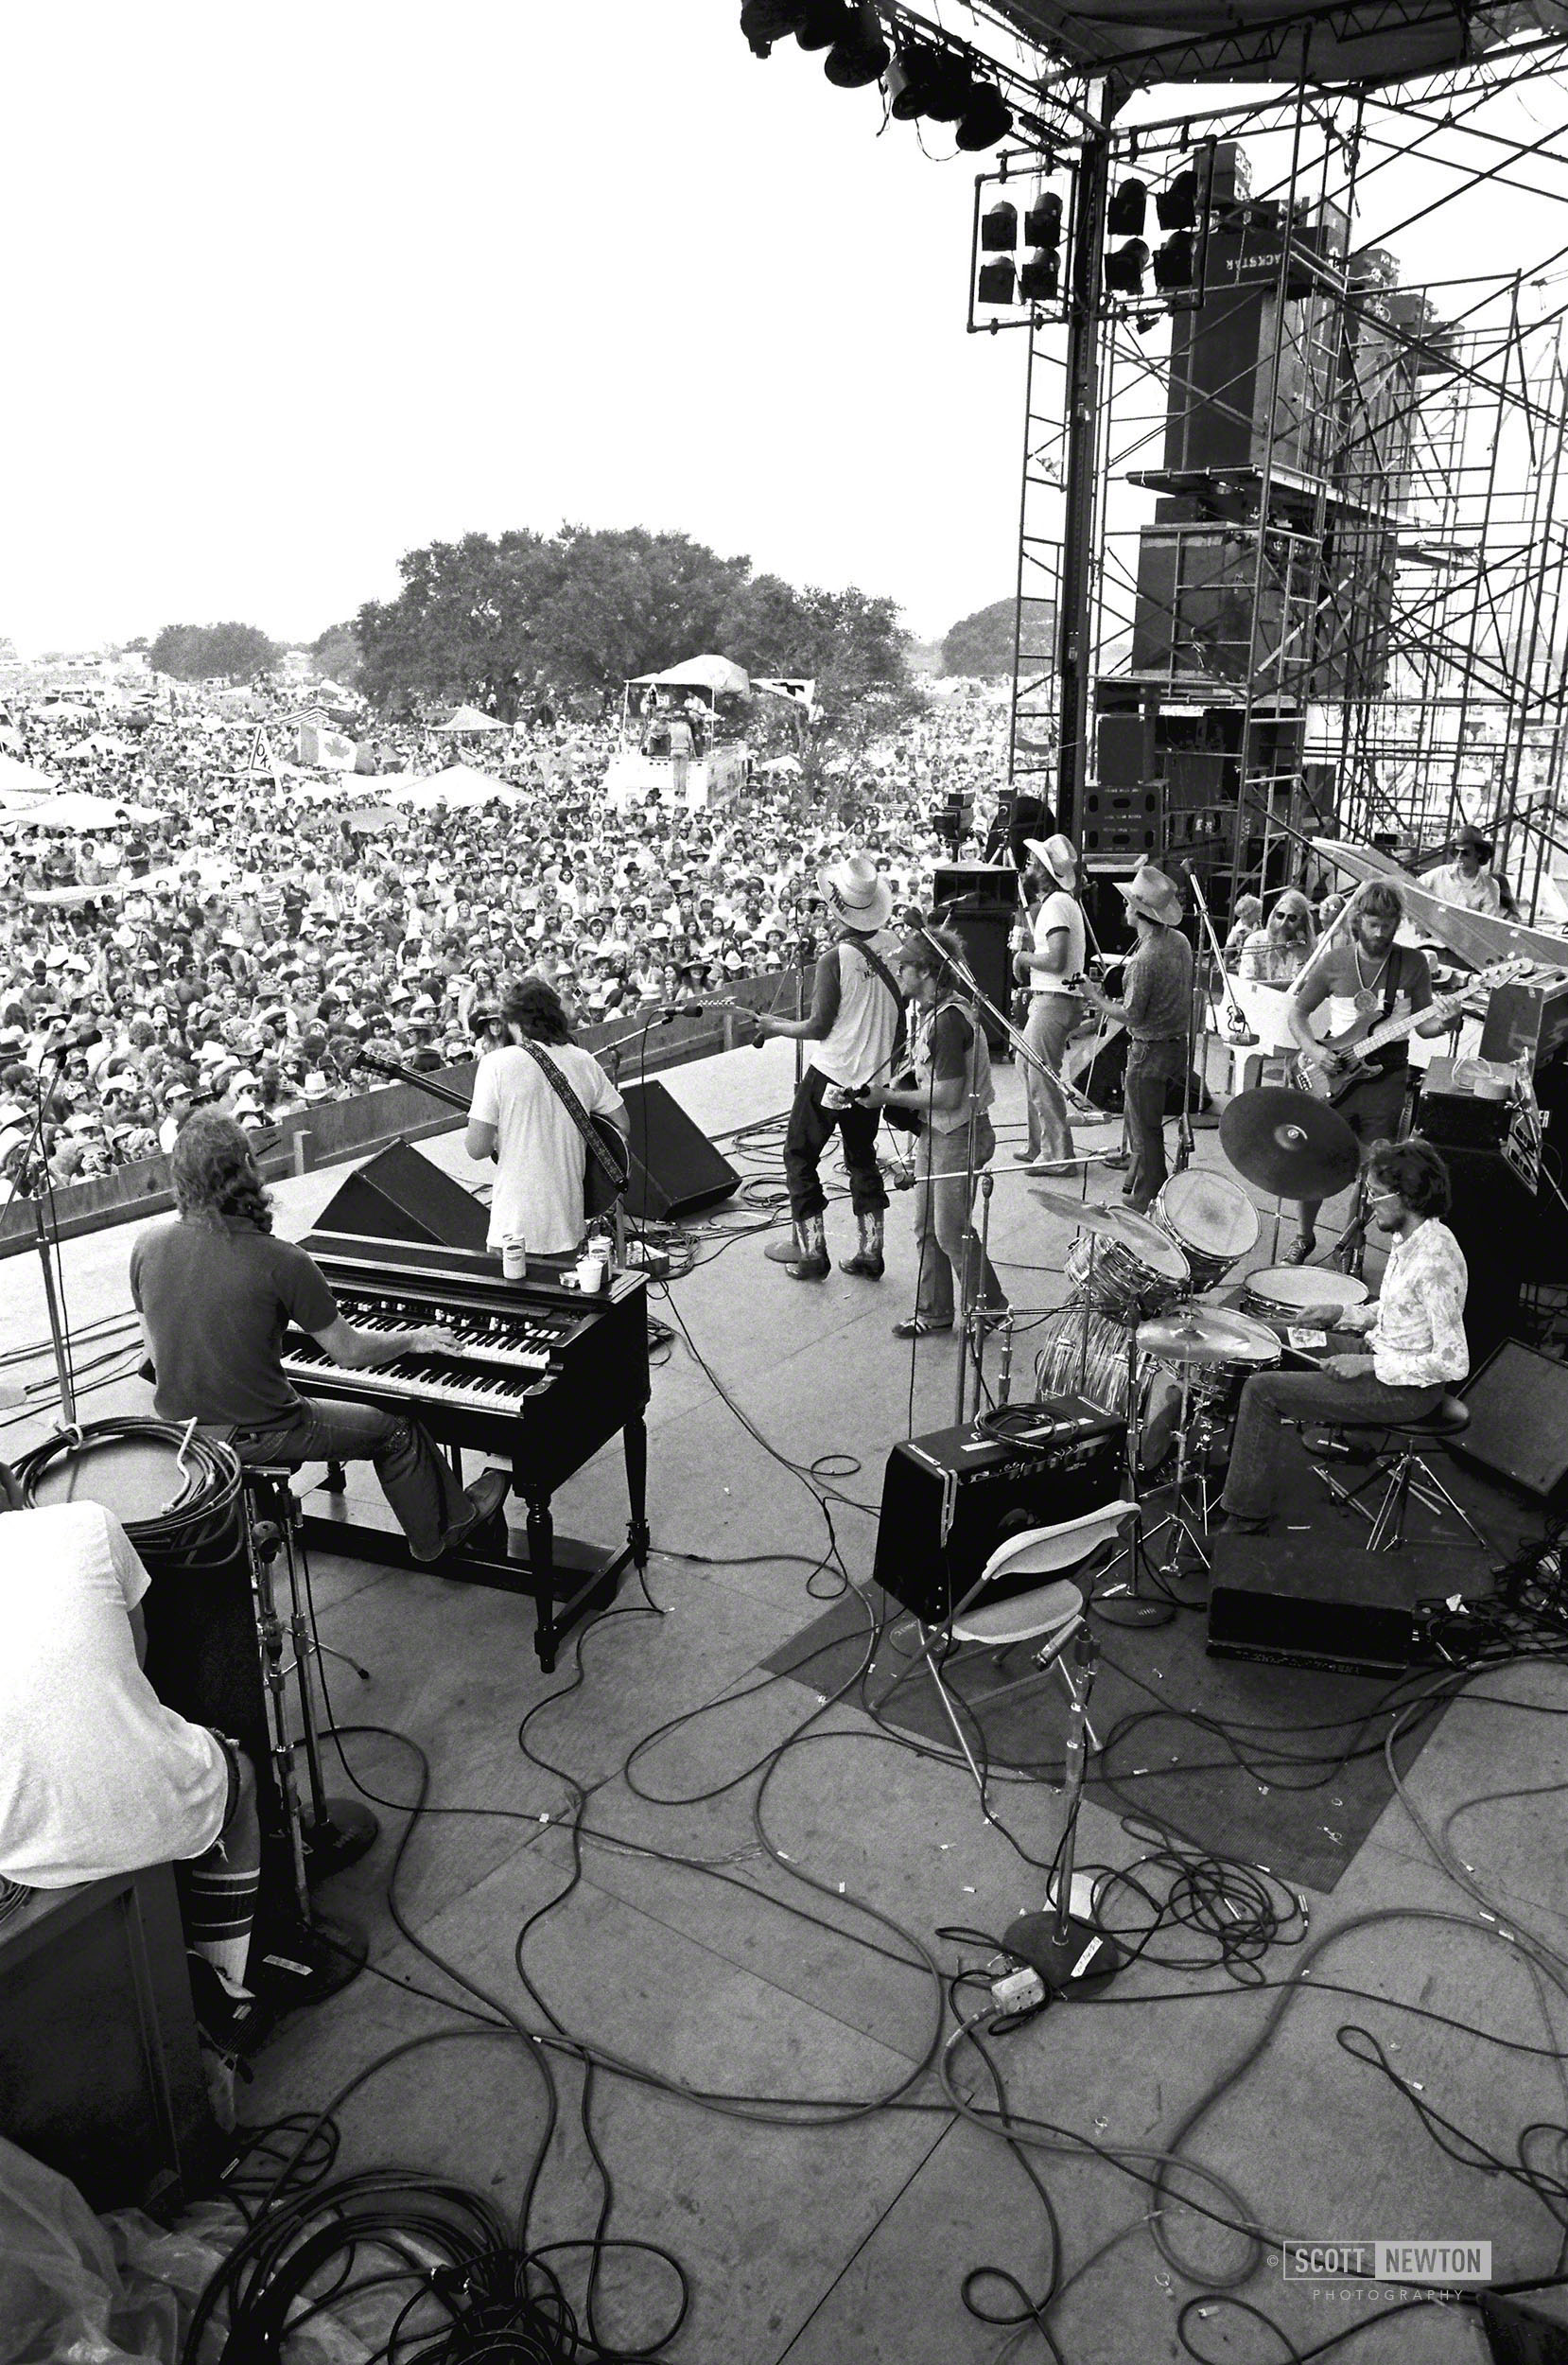 Jerry Jeff Walker @ Willie's 4th of July Picnic in Gonzales, Texas 1976